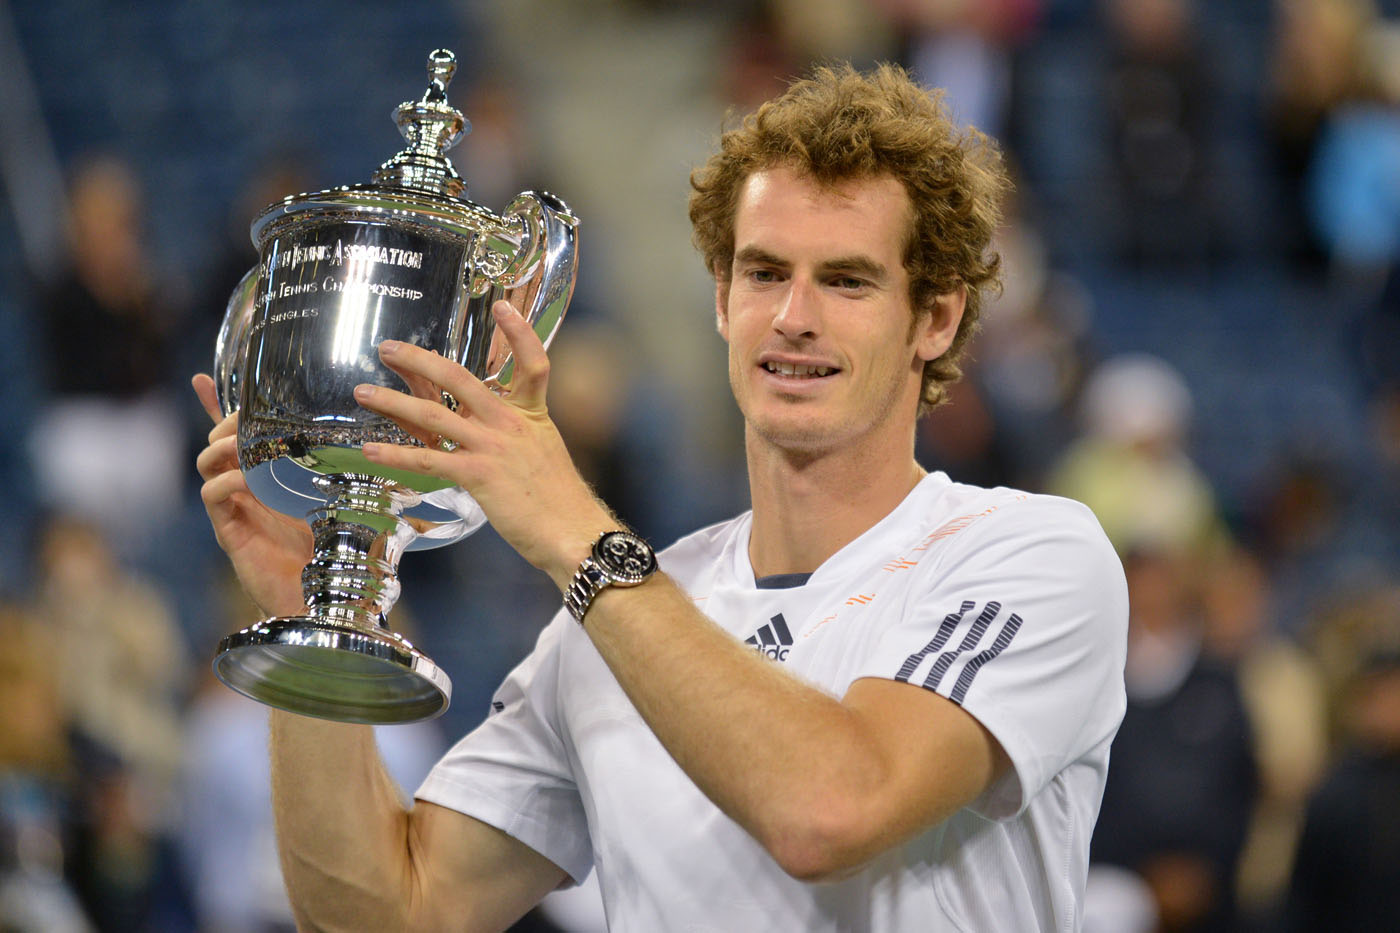 Andy Murray Wins His First Grand Slam Us Open 2012 Winner 